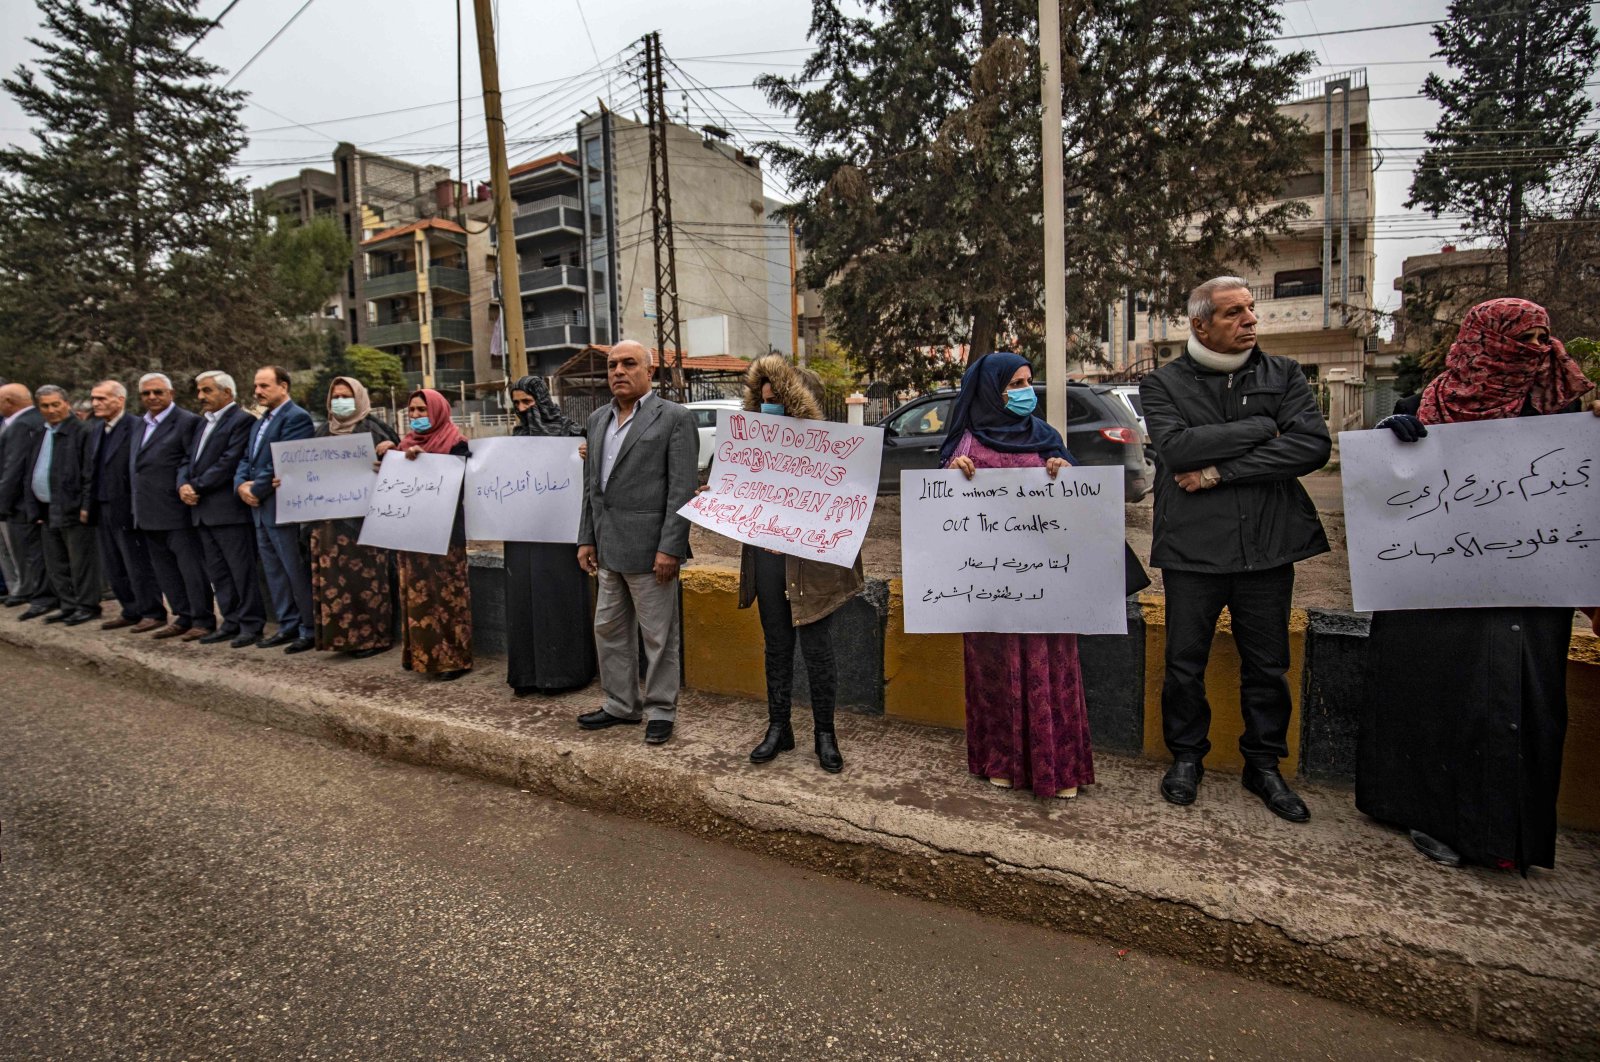 Kurdish parents demonstrate outside a U.N. building, calling on authorities to help release young girls they say were abducted and recruited into fighting by YPG/PKK, in the northeast city of Qamishli on Nov. 28, 2021. (AFP Photo)